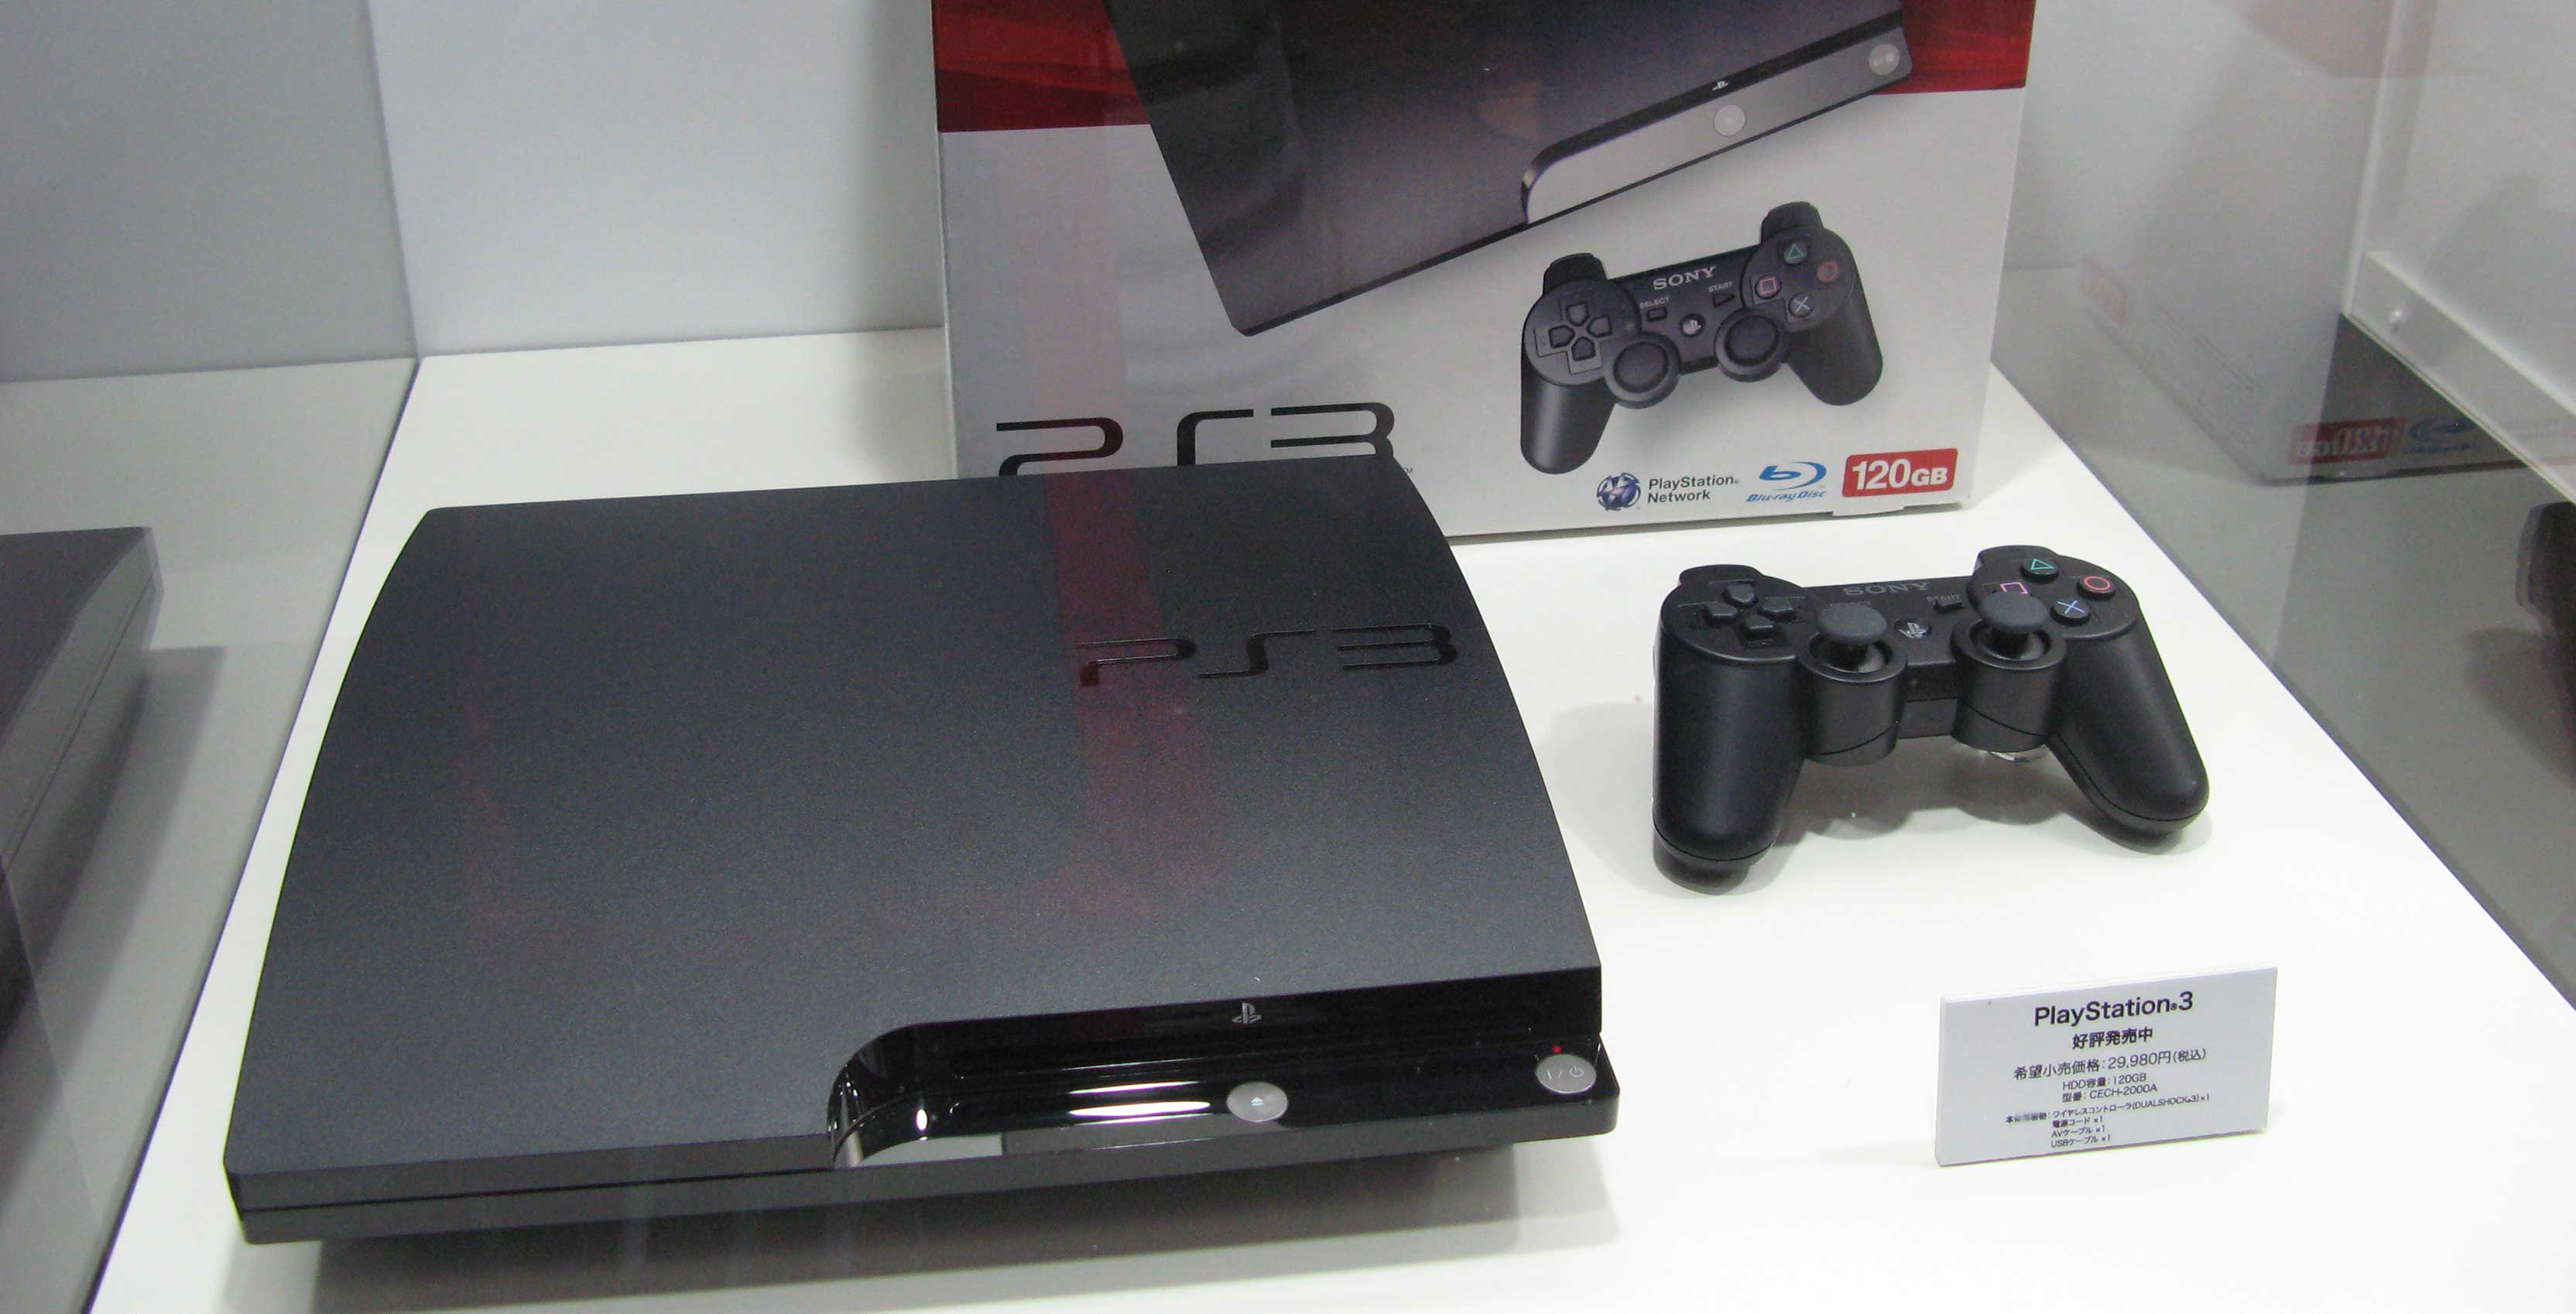 PlayStation 3 slim in glass case